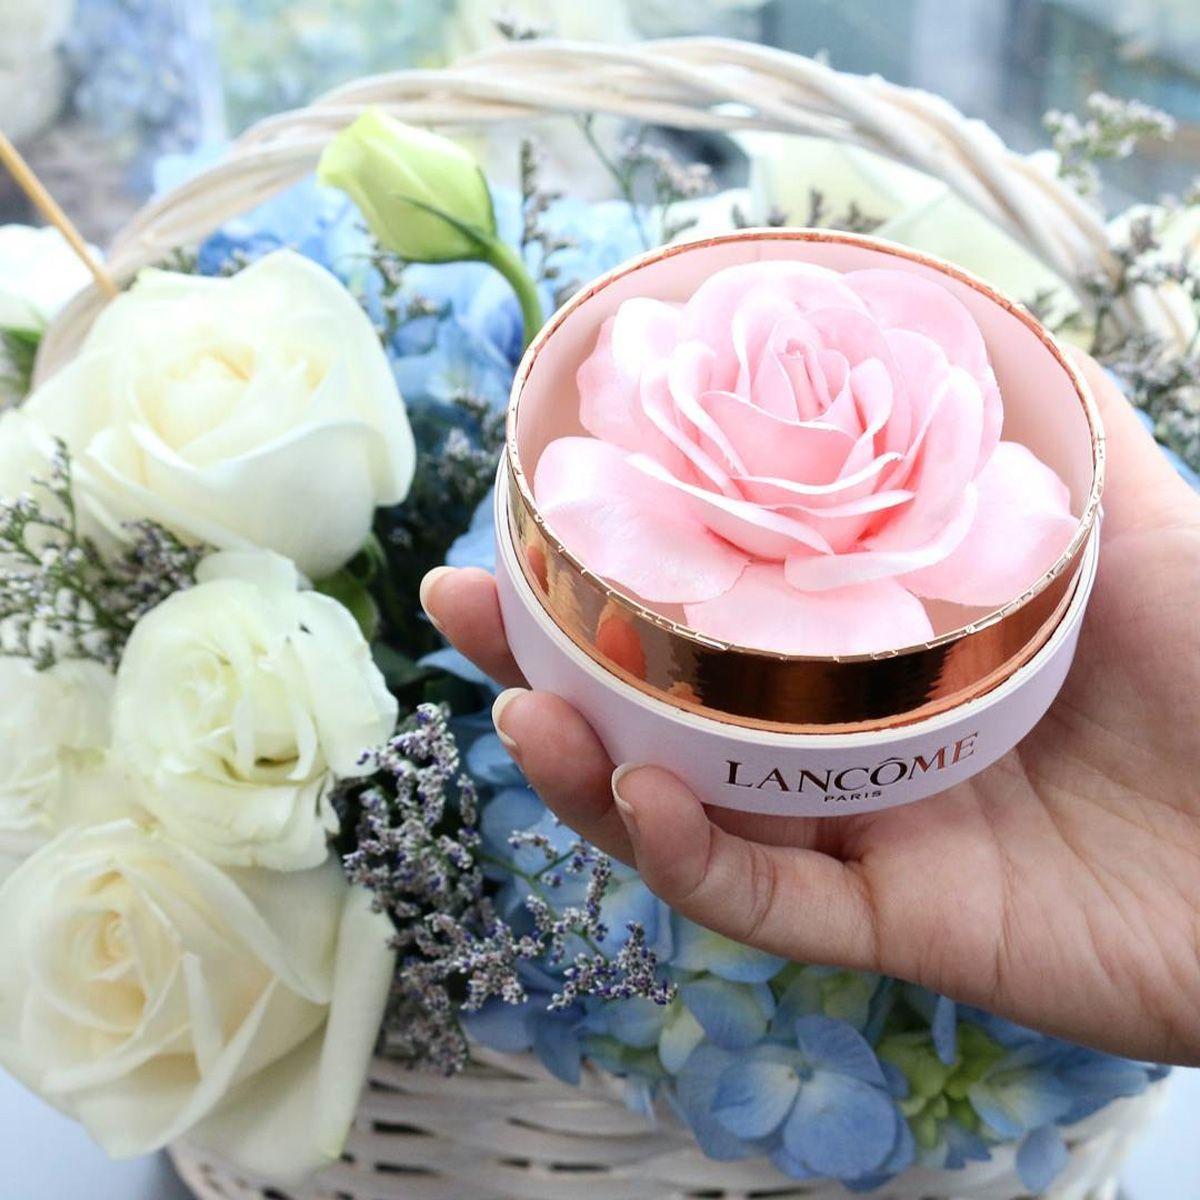 Lancome Flower Logo - Lancôme Launches New Rose-Shaped Highlighter and it's Amazing